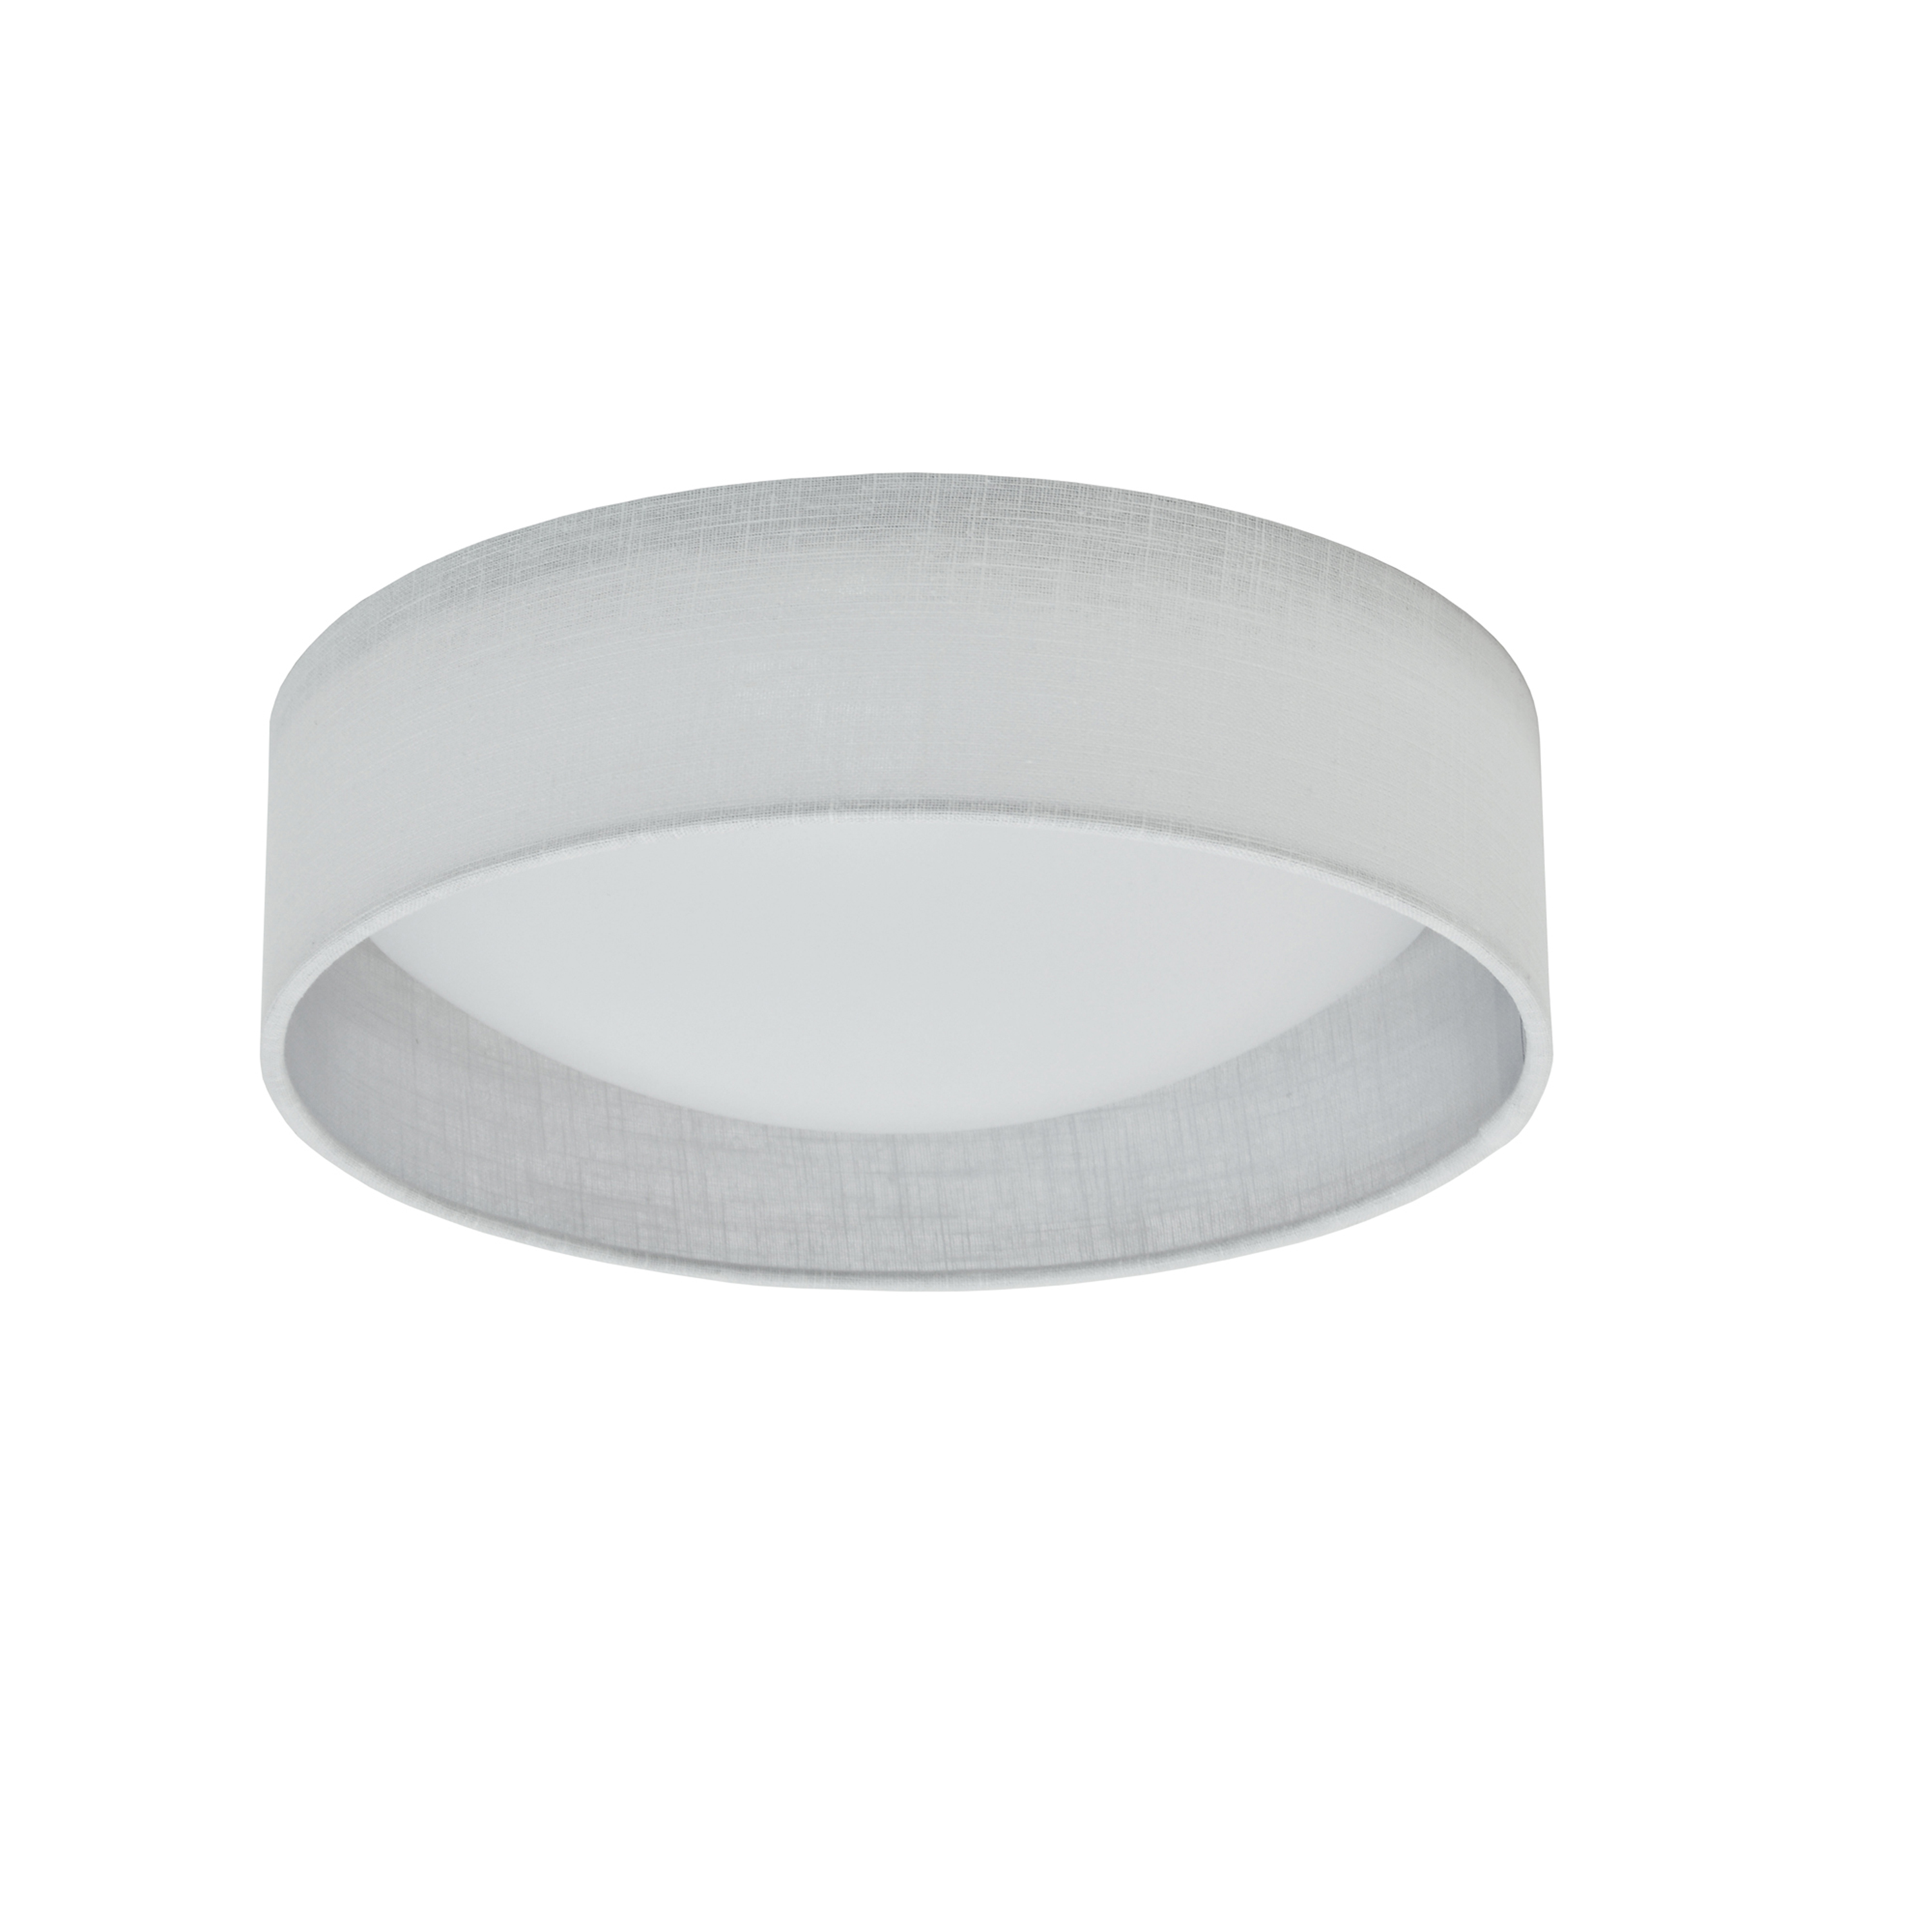 A simple design, and a sleek profile, make CFLD lighting a versatile family that will enhance the furnishing in many areas of your home. The design features an integrated LED light. LED fixtures produce light at up to 90 percent better efficiency than incandescent lighting. An acrylic base holds a fabric shade in a drum style. With a narrow profile, it reveals both the rounded LED inside, and an optional contrasting finish on the interior of the shade. With its clean lines and unfussy appeal, the CFLD family of lighting works well in your modern kitchen, bedroom, hallway or utlity room.